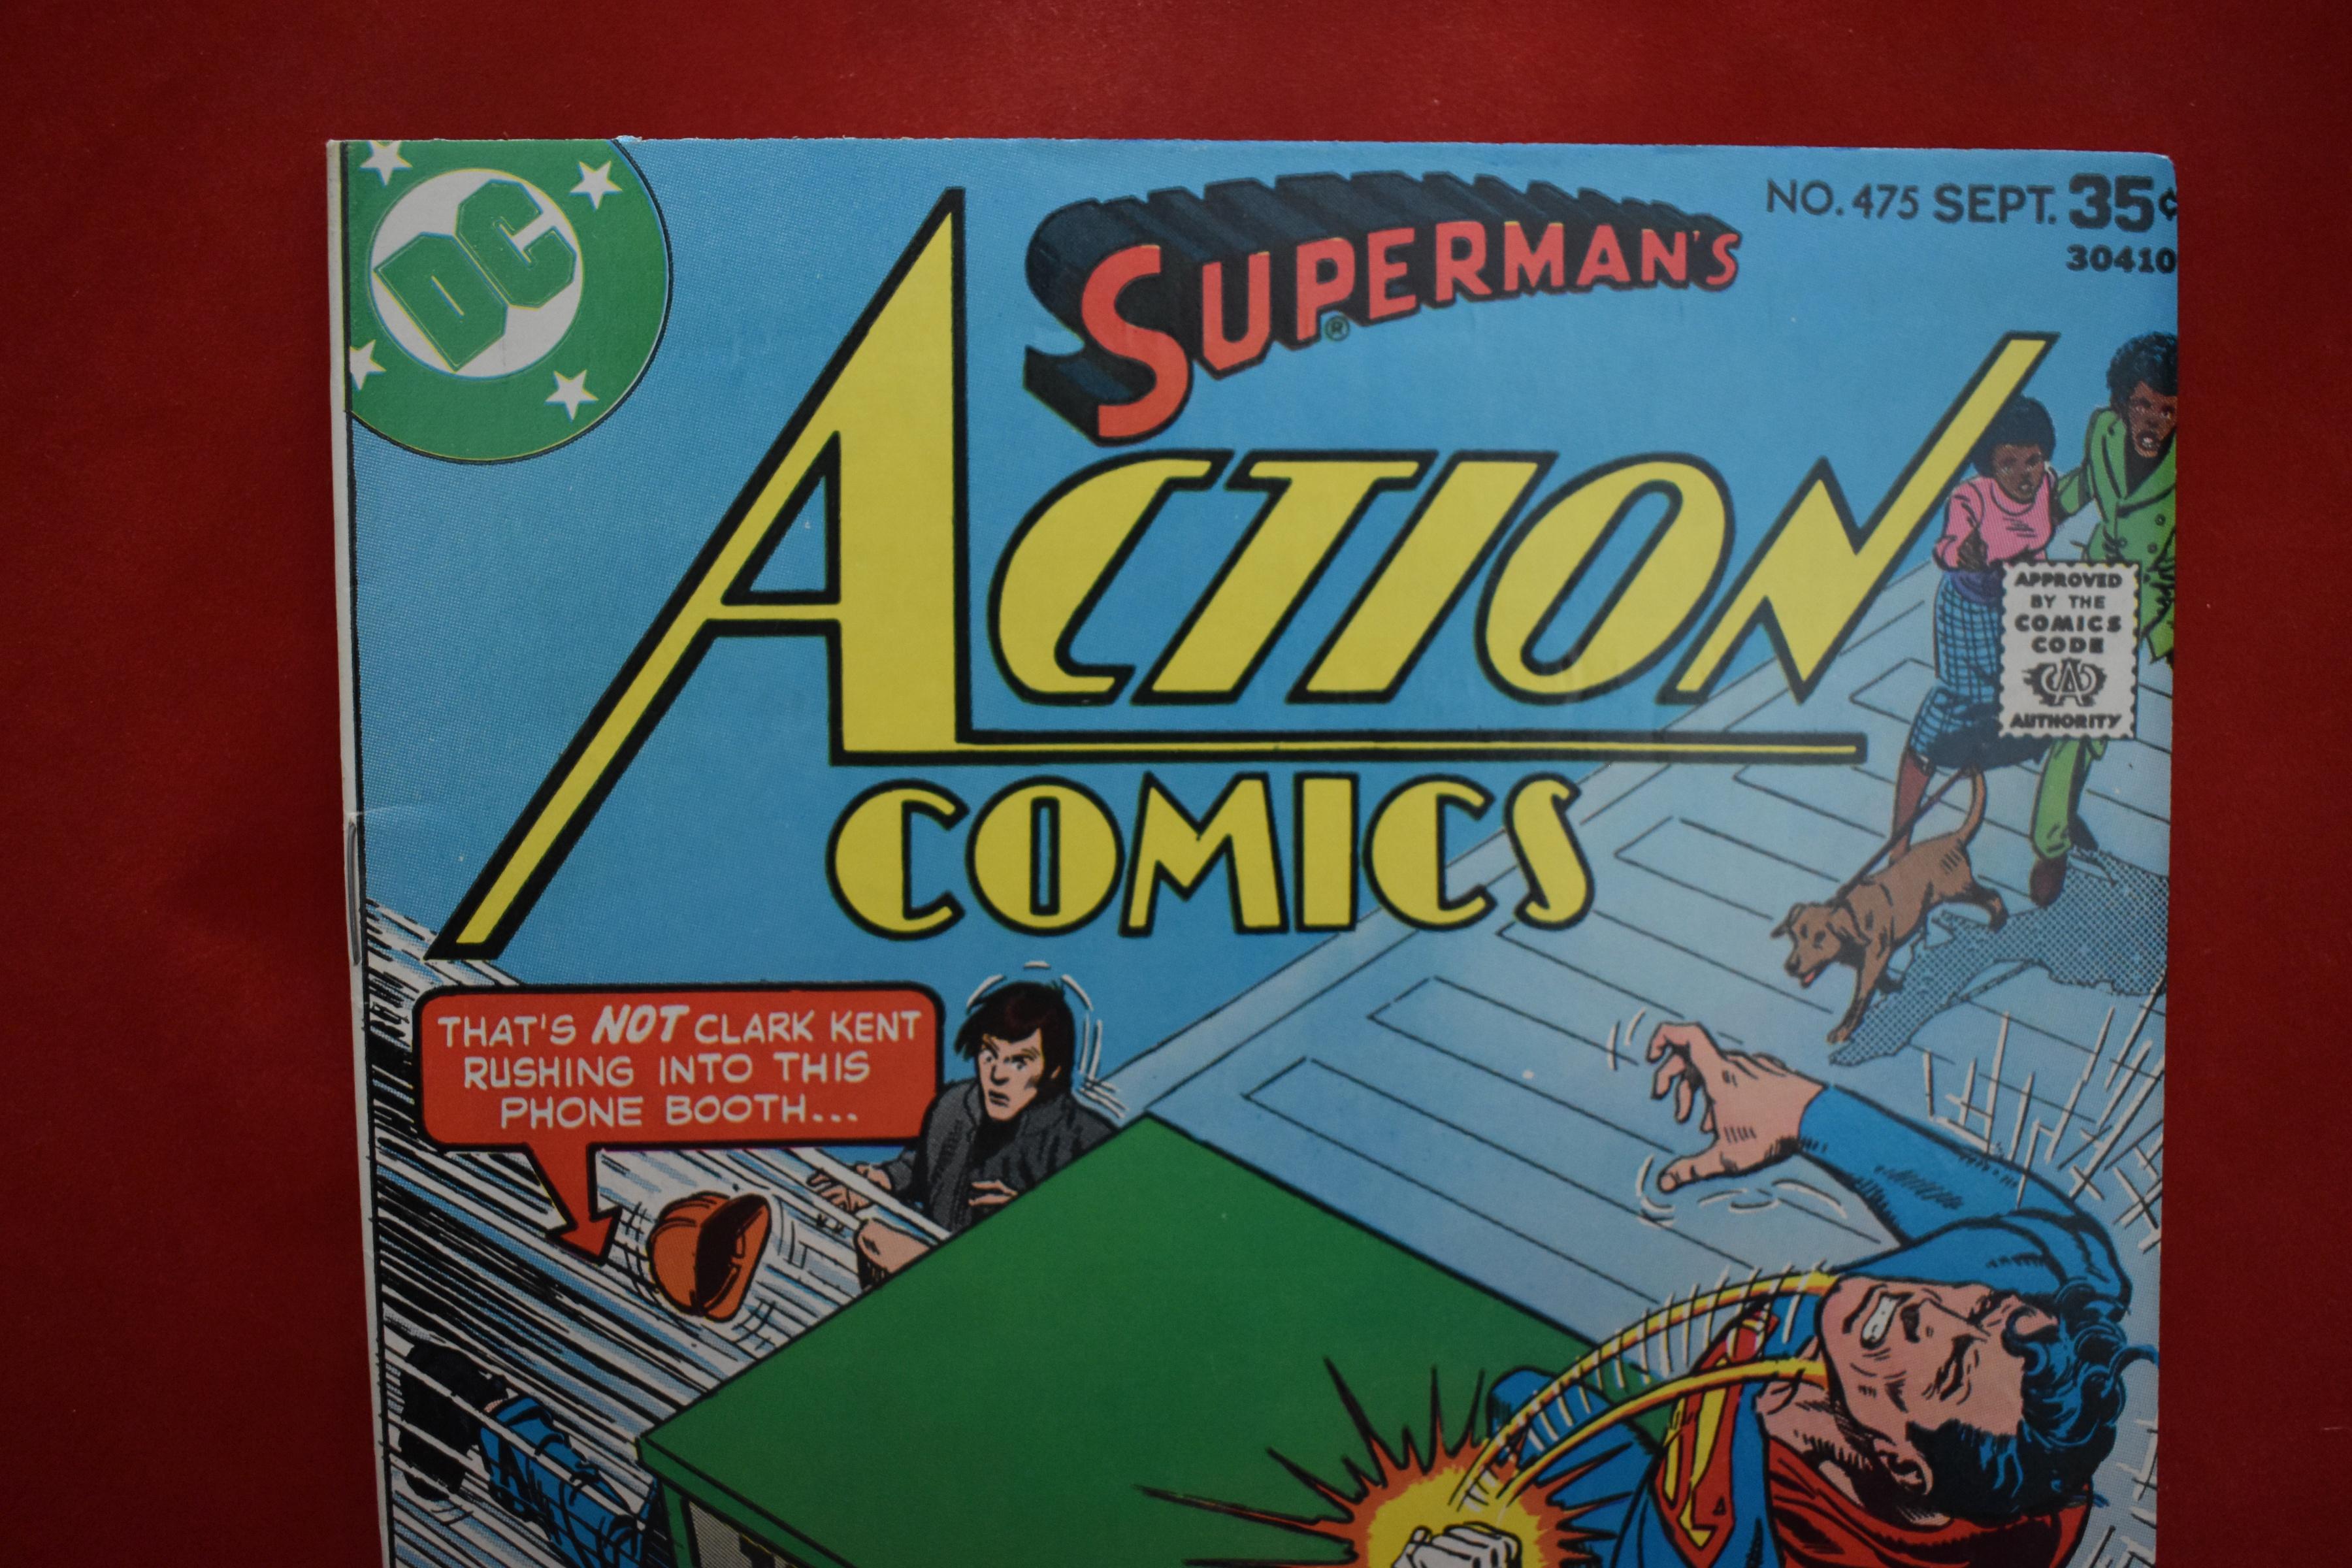 ACTION COMICS #475 | THE SUPER HERO WHO REFUSED TO HANG UP HIS BOOTS | GARCIA-LOPEZ - 1977